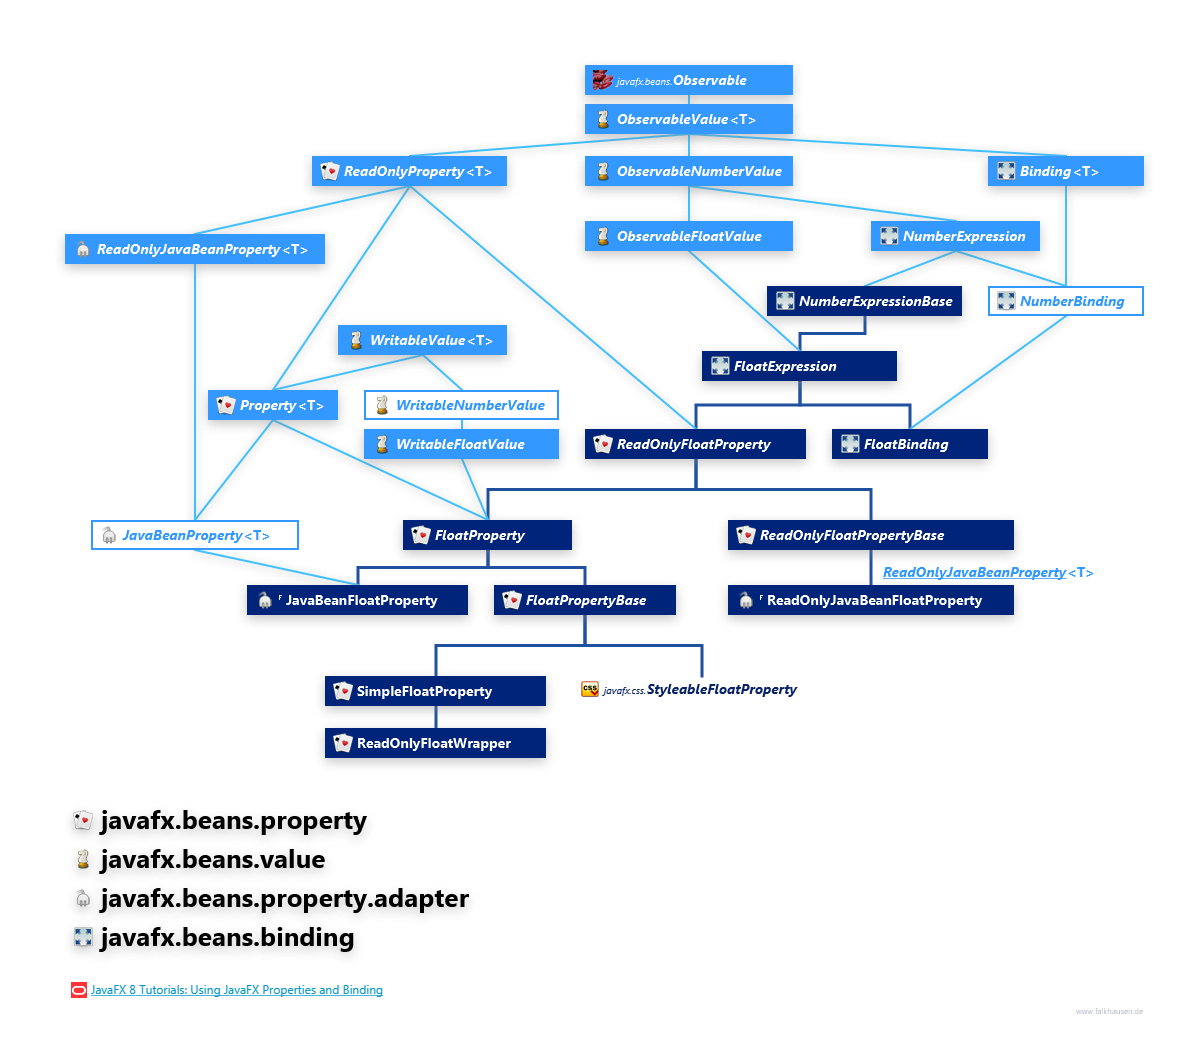 javafx.beans.property javafx.beans.value javafx.beans.property.adapter javafx.beans.binding FloatProperty Hierarchy class diagram and api documentation for JavaFX 10